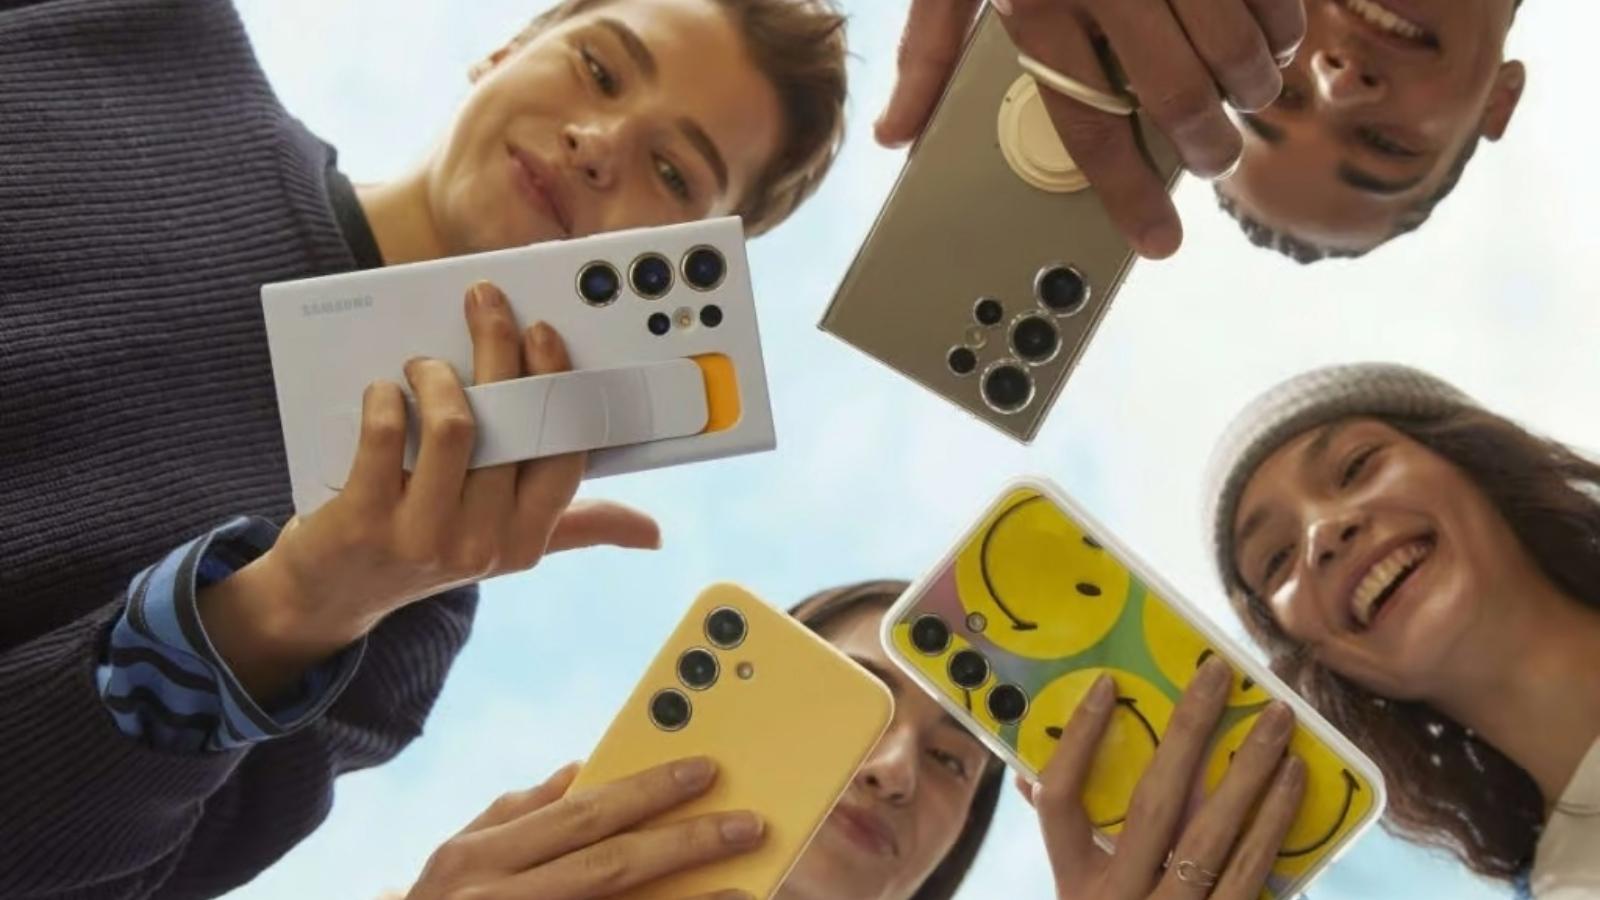 Image showing 4 people holding Samsung Galaxy S24 series in their hands and smiling for the camera.